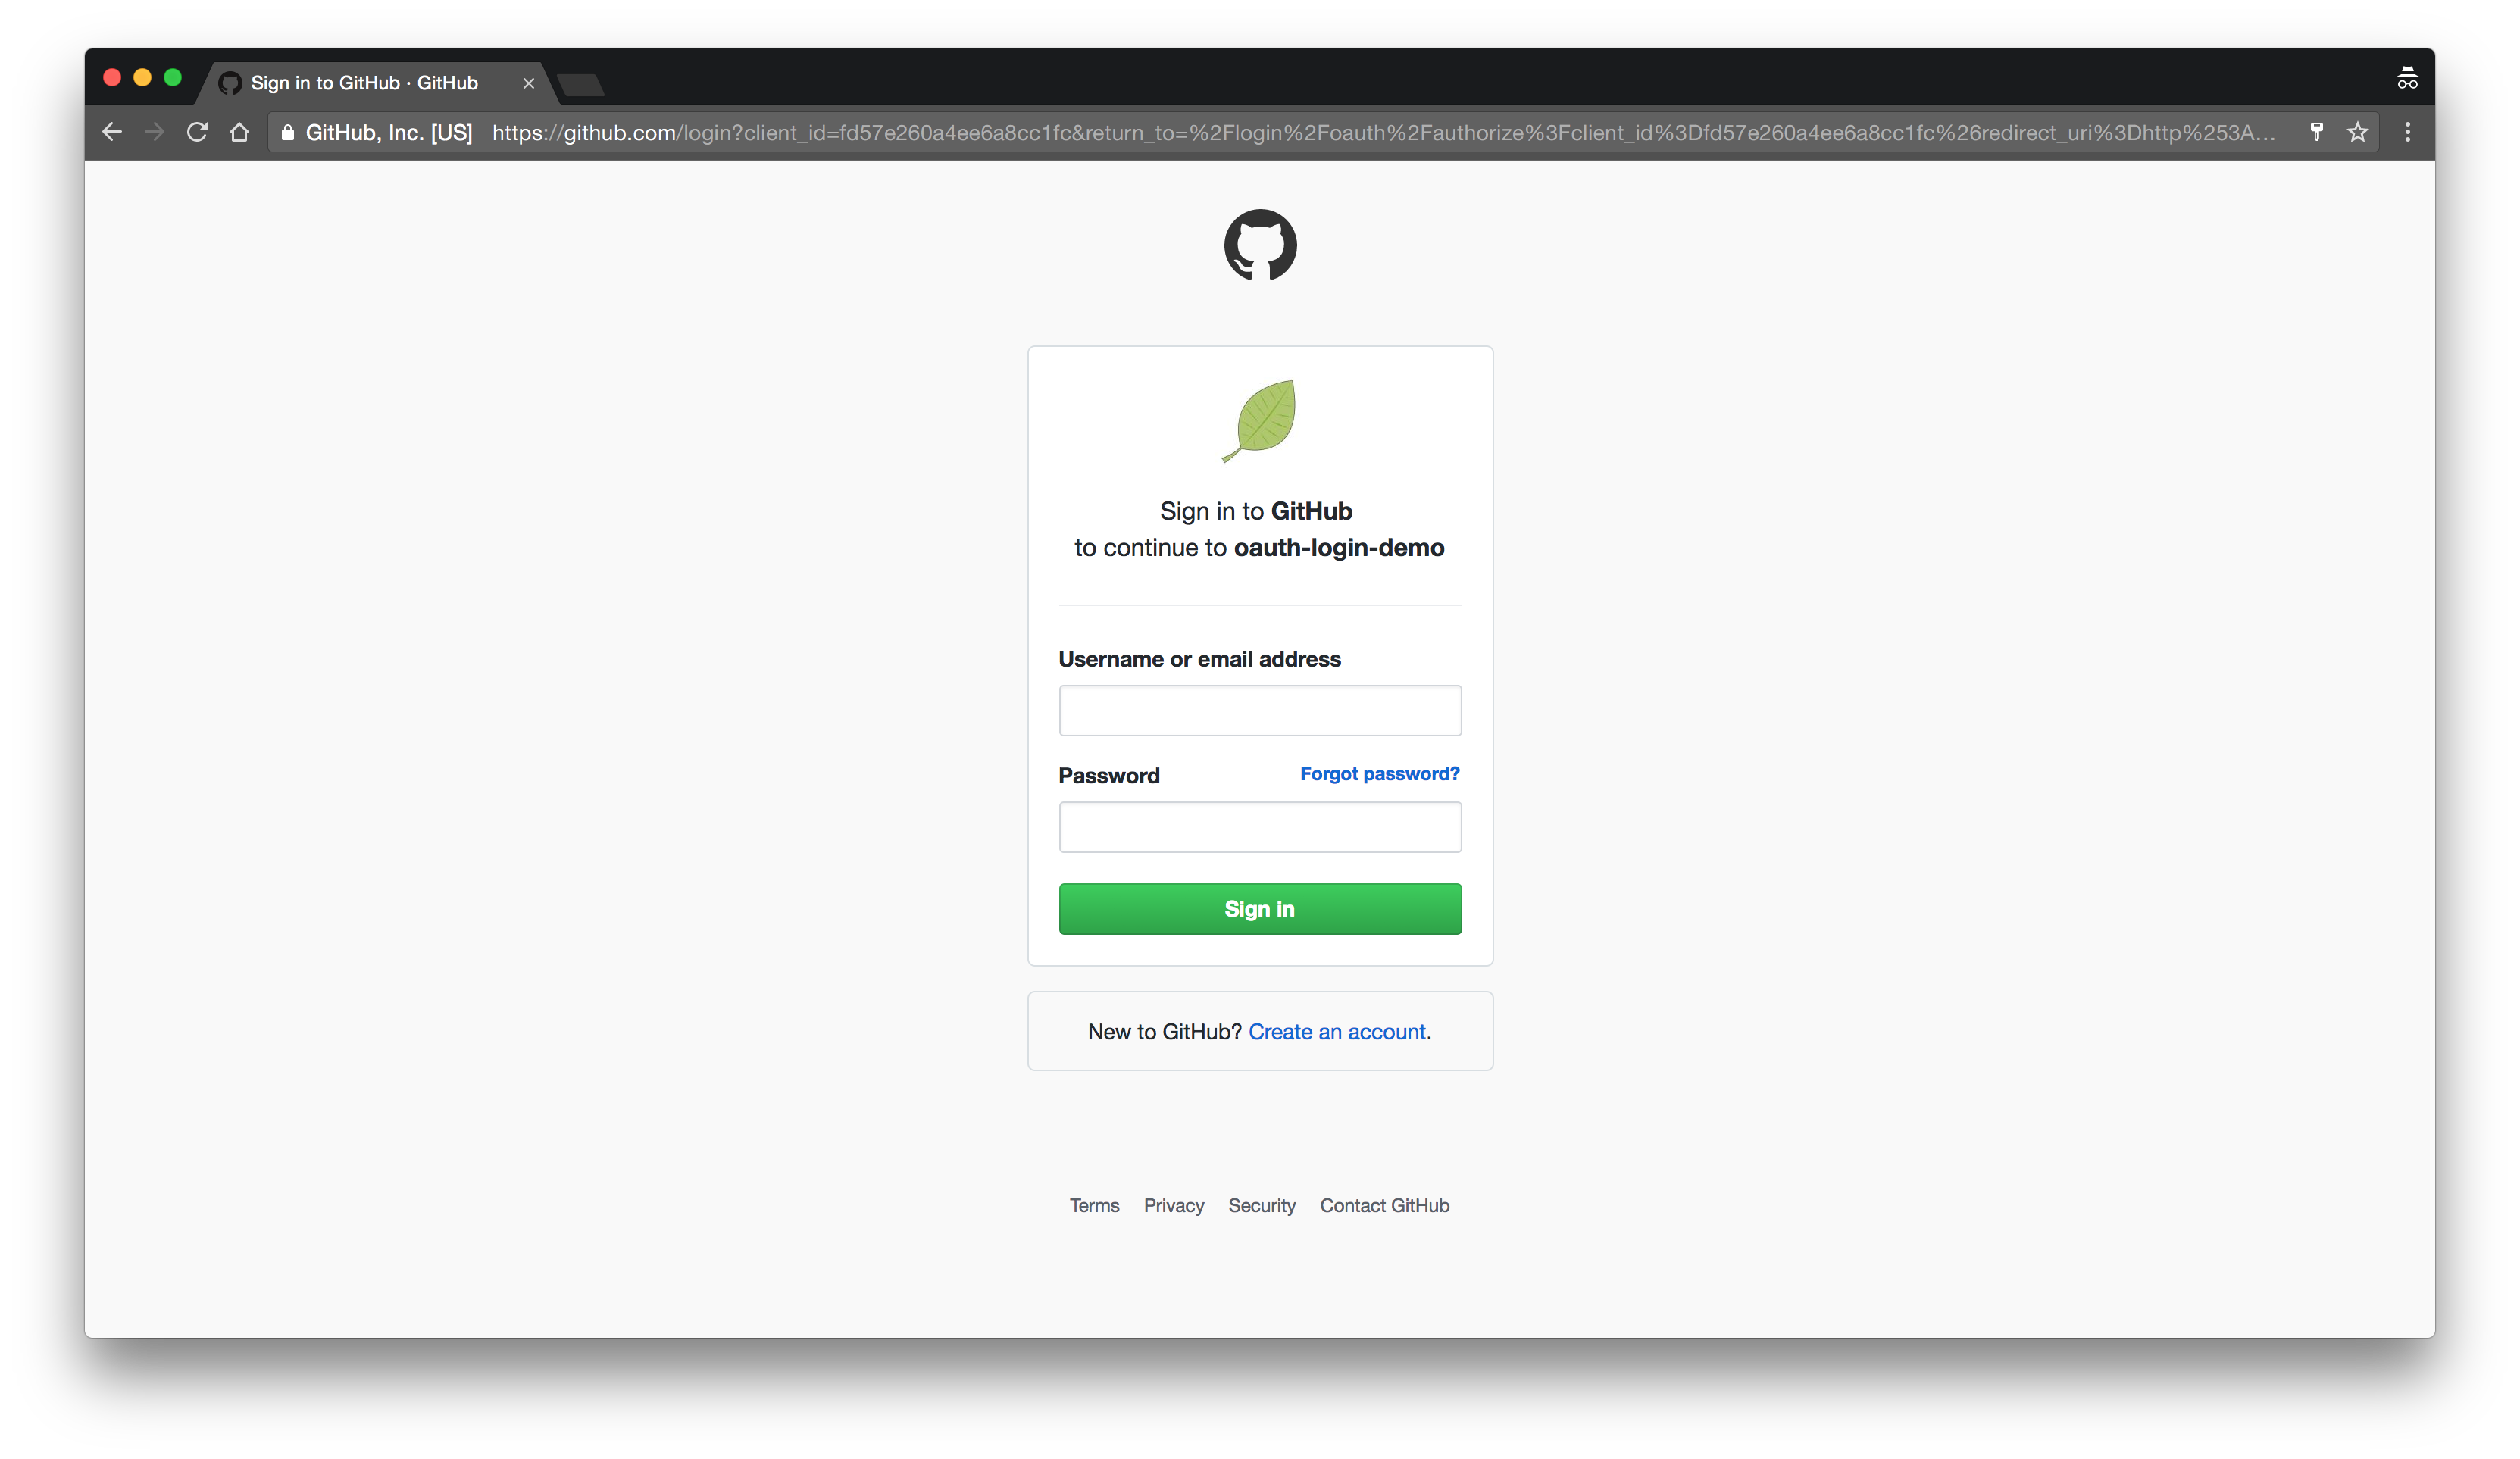 oauth2-github-login-page.png